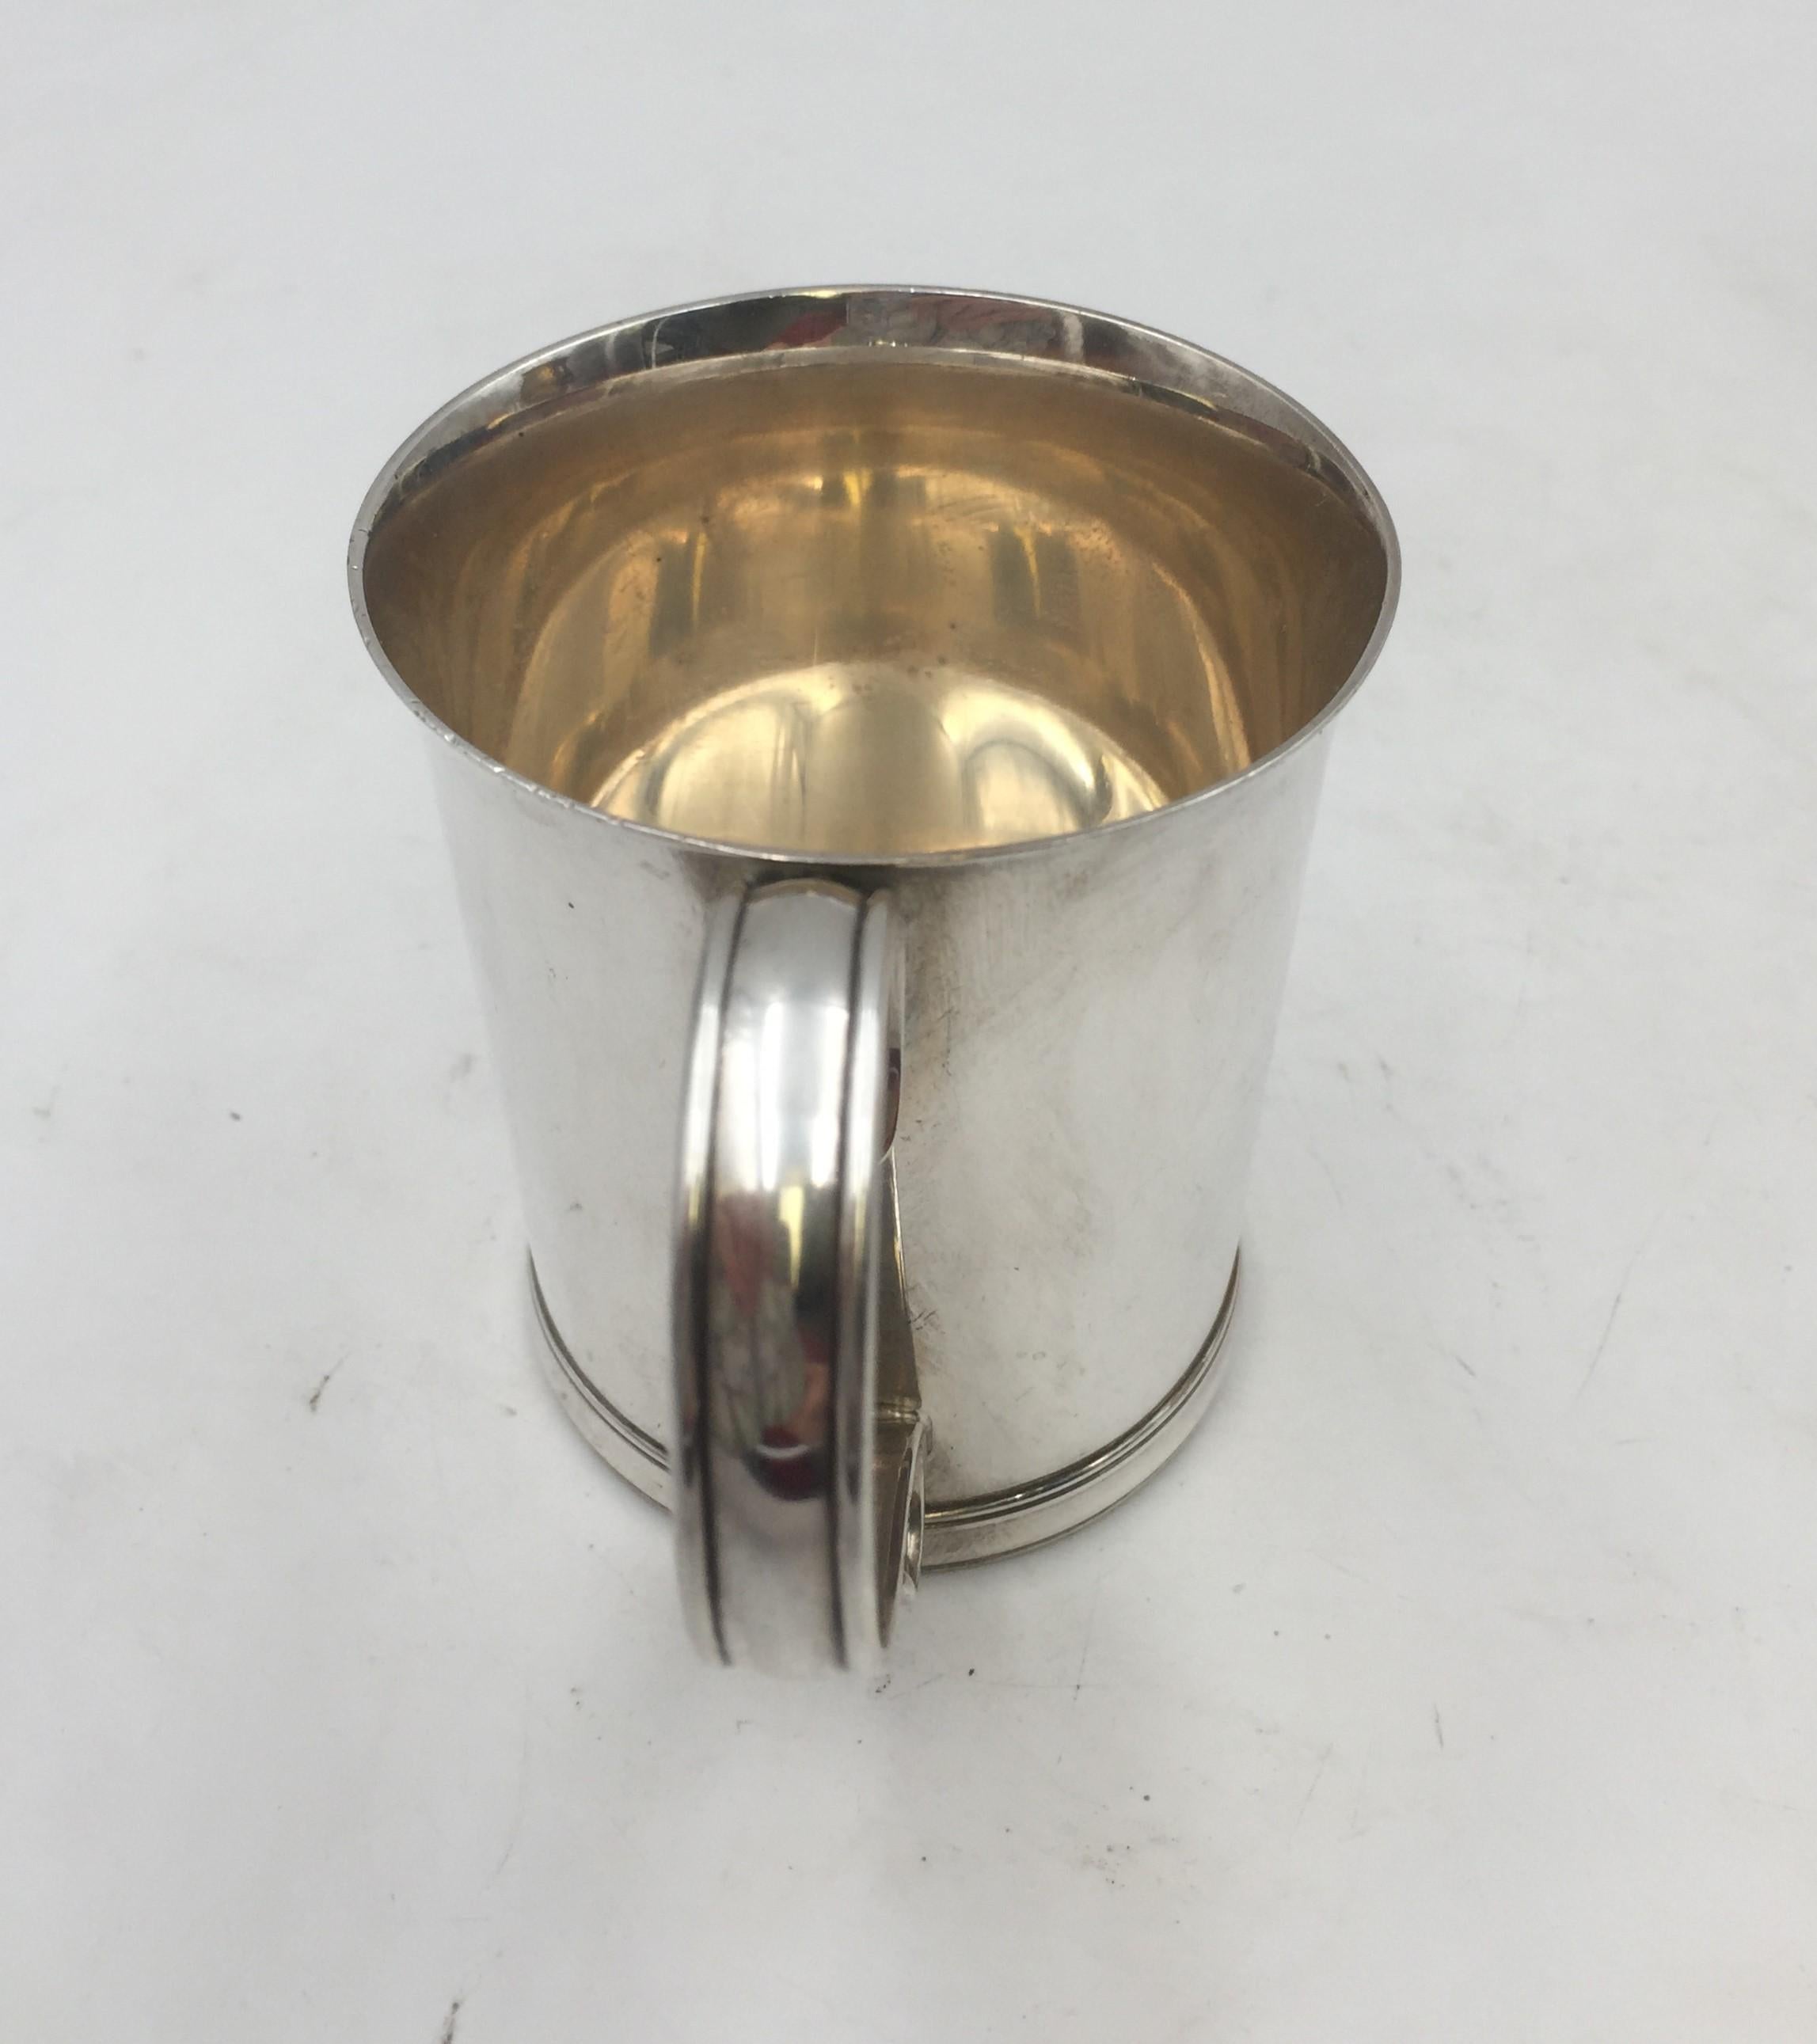 Tiffany & Co. sterling silver Christening cup / child mug in pattern 19184 from 1916 in simple, elegant design, measuring 3 1/4'' in height and 4 1/4'' from handle to cup, weighing 6.3 ozt, and bearing hallmarks as shown.

Founded in 1837 by